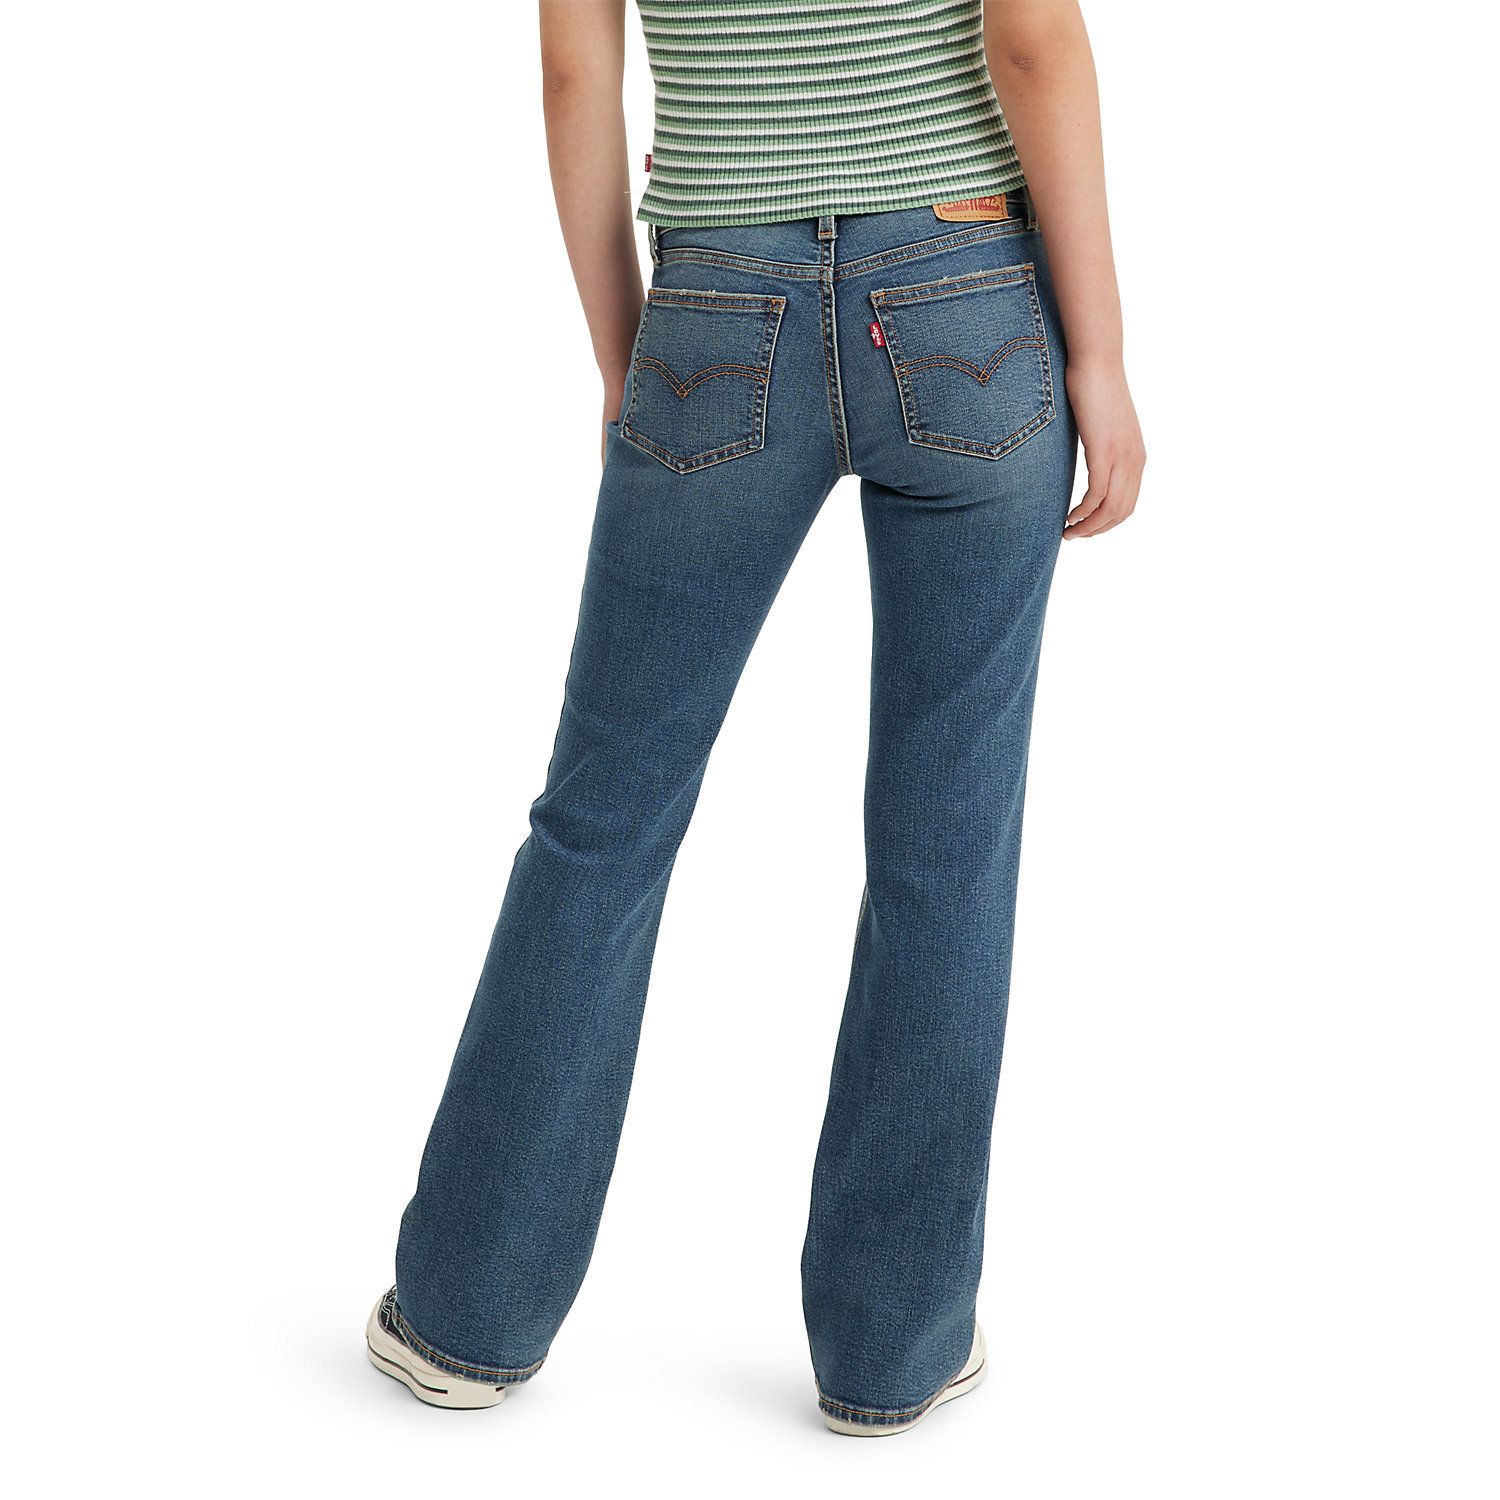 Levi's Bootcut Jeans for Women